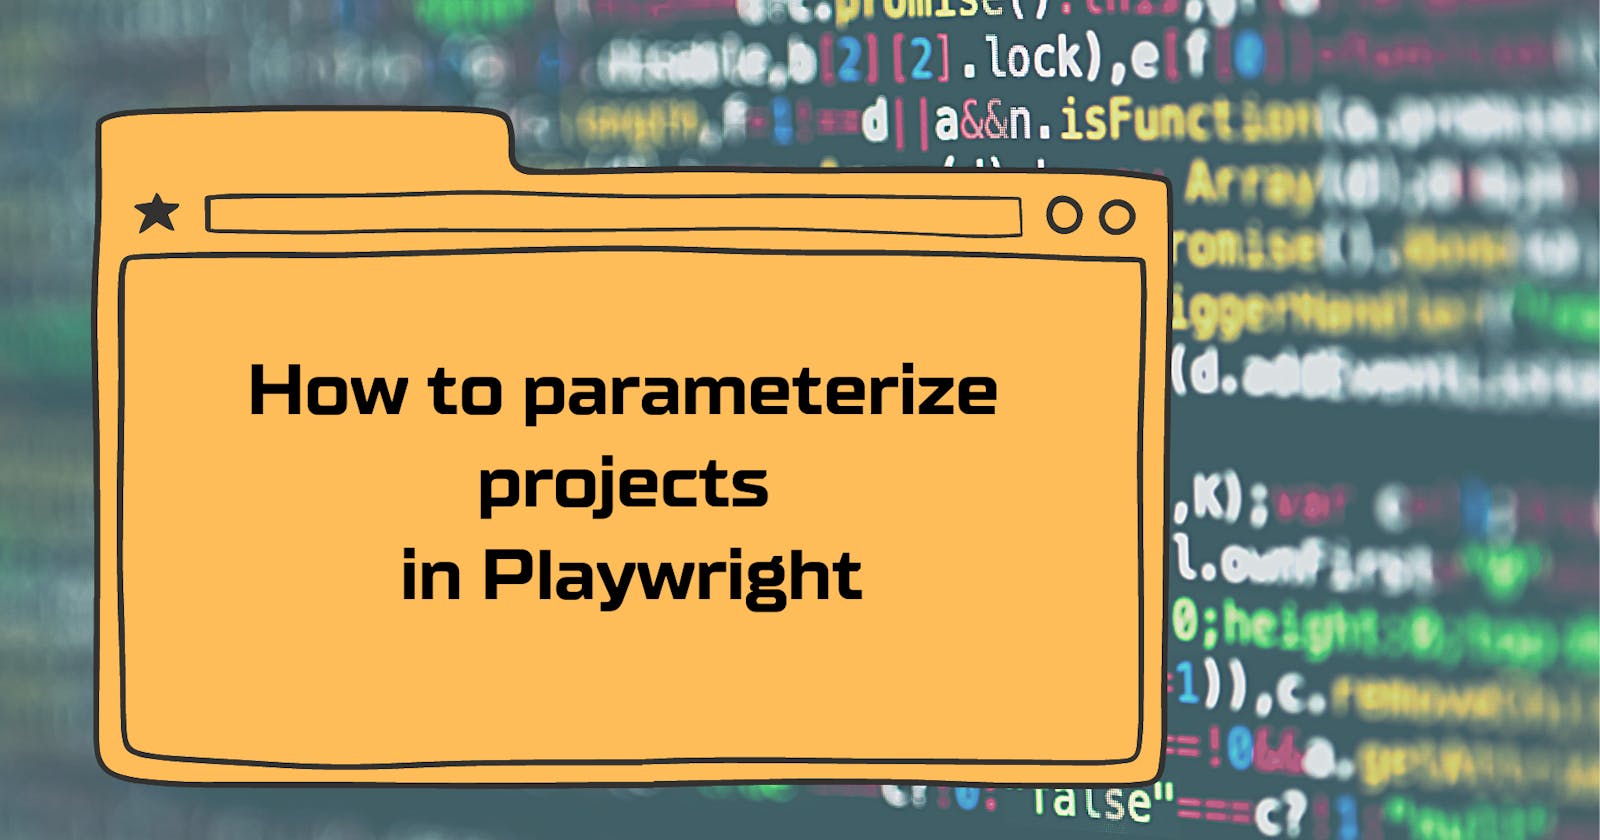 How to parameterize projects in Playwright